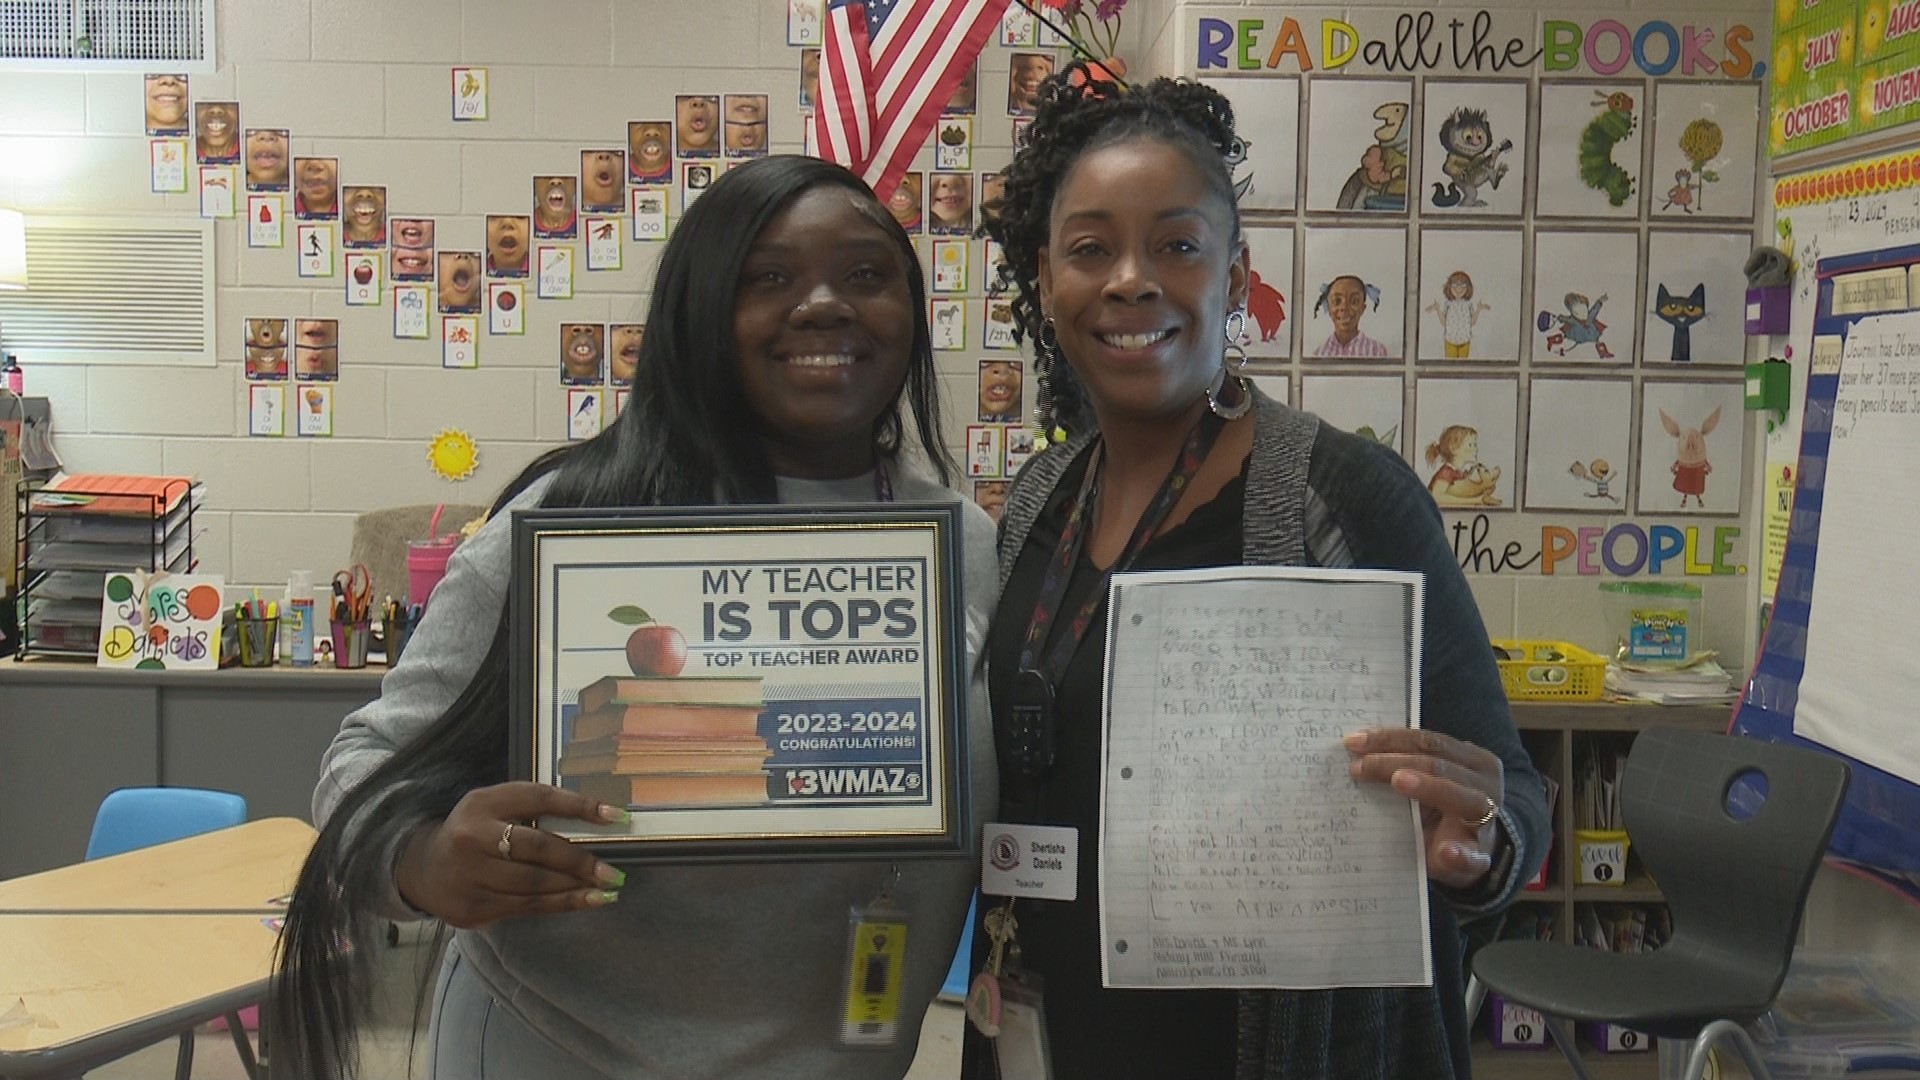 Two teachers born and raised in Milledgeville were awarded top teachers at Midway Hills Primary.